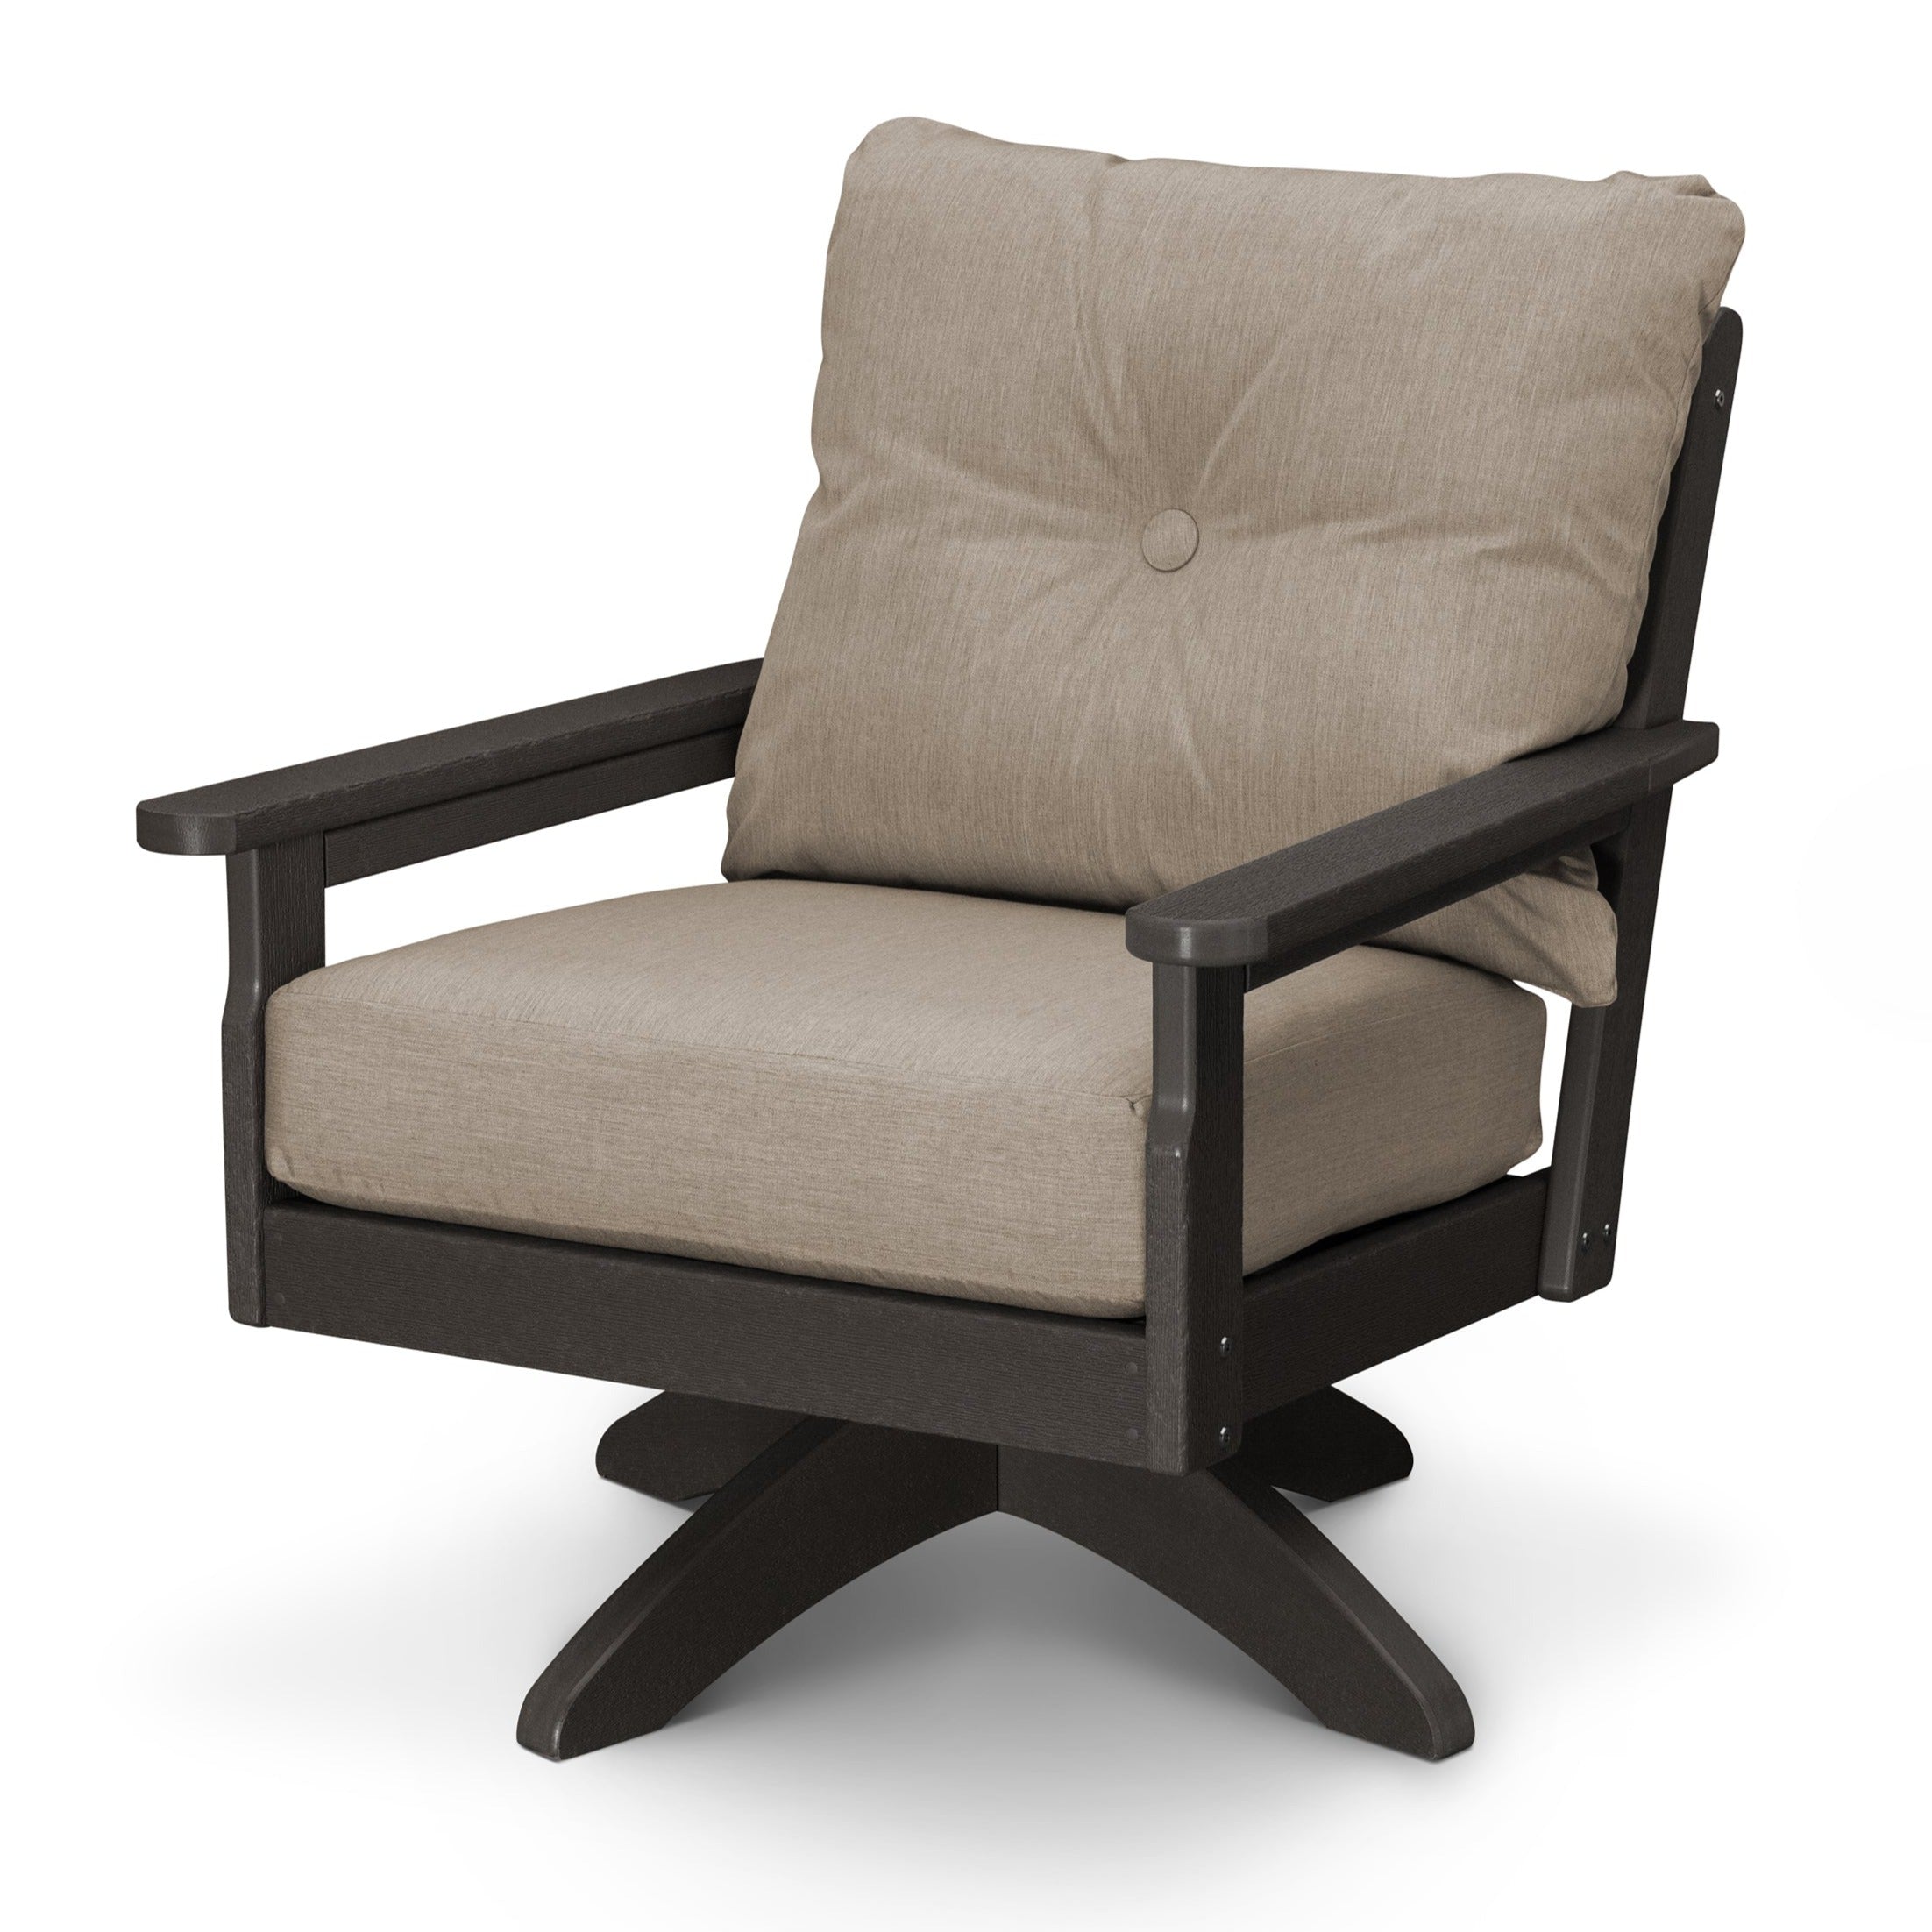 POLYWOOD Vineyard Deep Seating Swivel Chair in Vintage Coffee and Cast Ash Cushion Outdoor Chairs 12037609